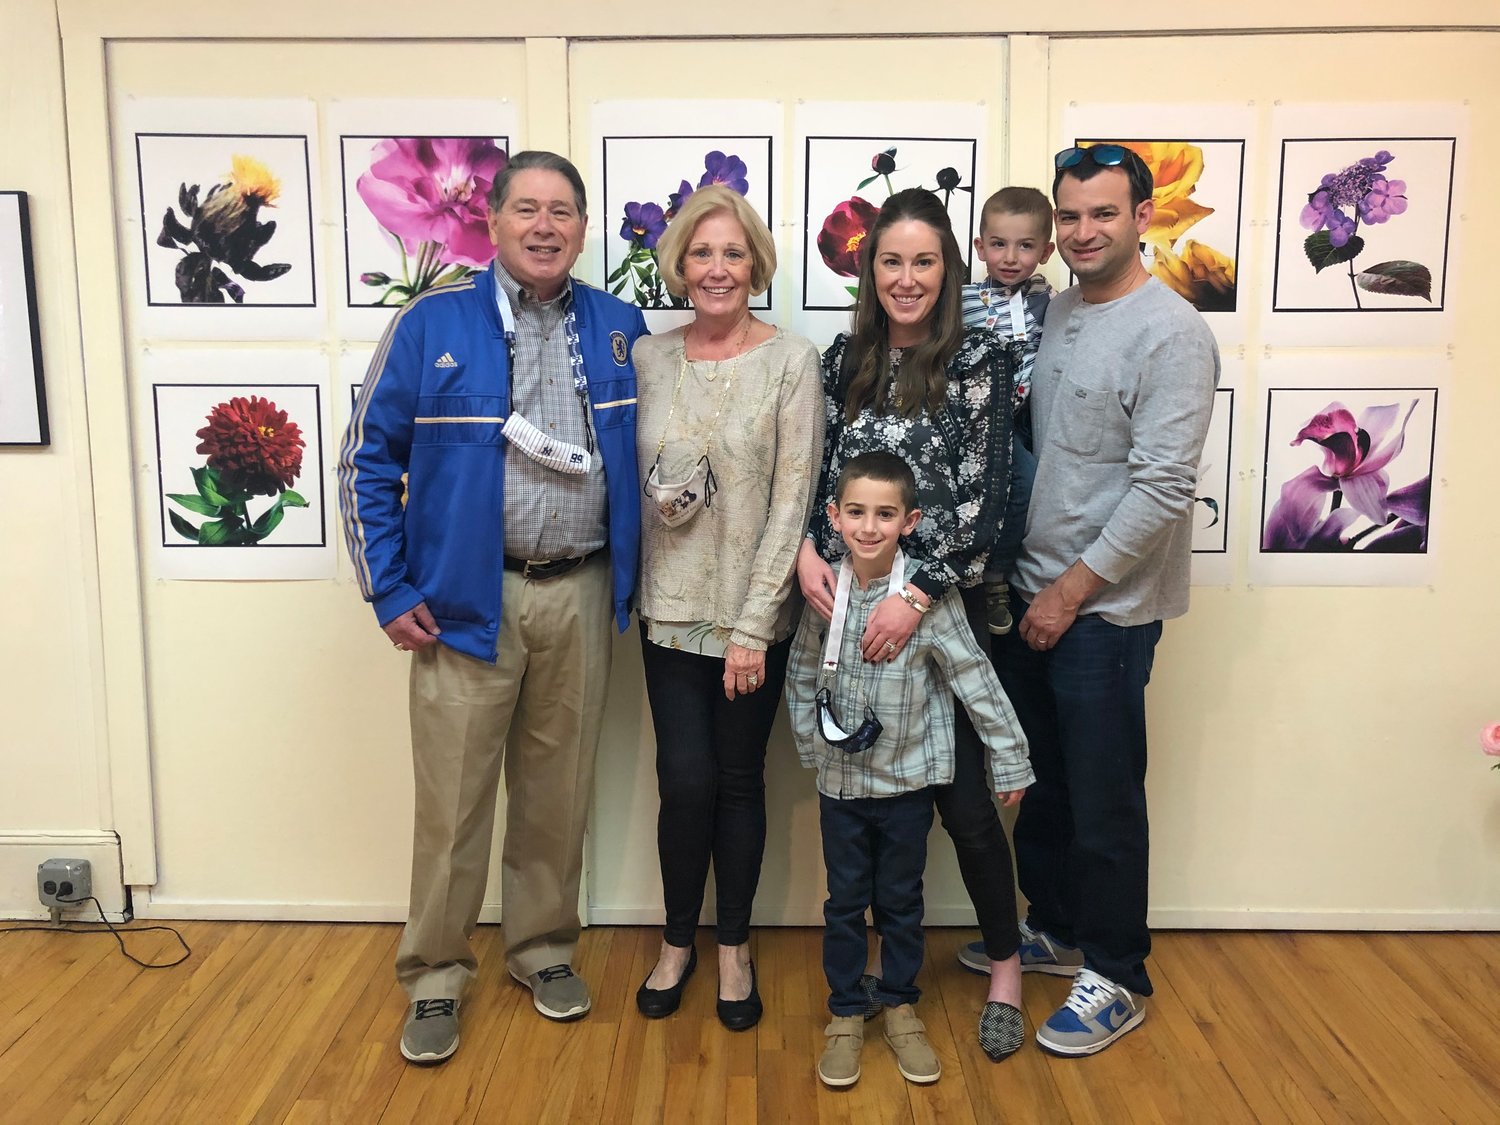 The extended Glueckstein family — from left, Fred and Eileen Glueckstein, and Deb, Drew, Jason and Max Wachtler — went to see the Eric Kamp exhibit at the Sea Cliff Village Museum. Fred Glueckstein is the late Eric Kamp’s brother-in-law.